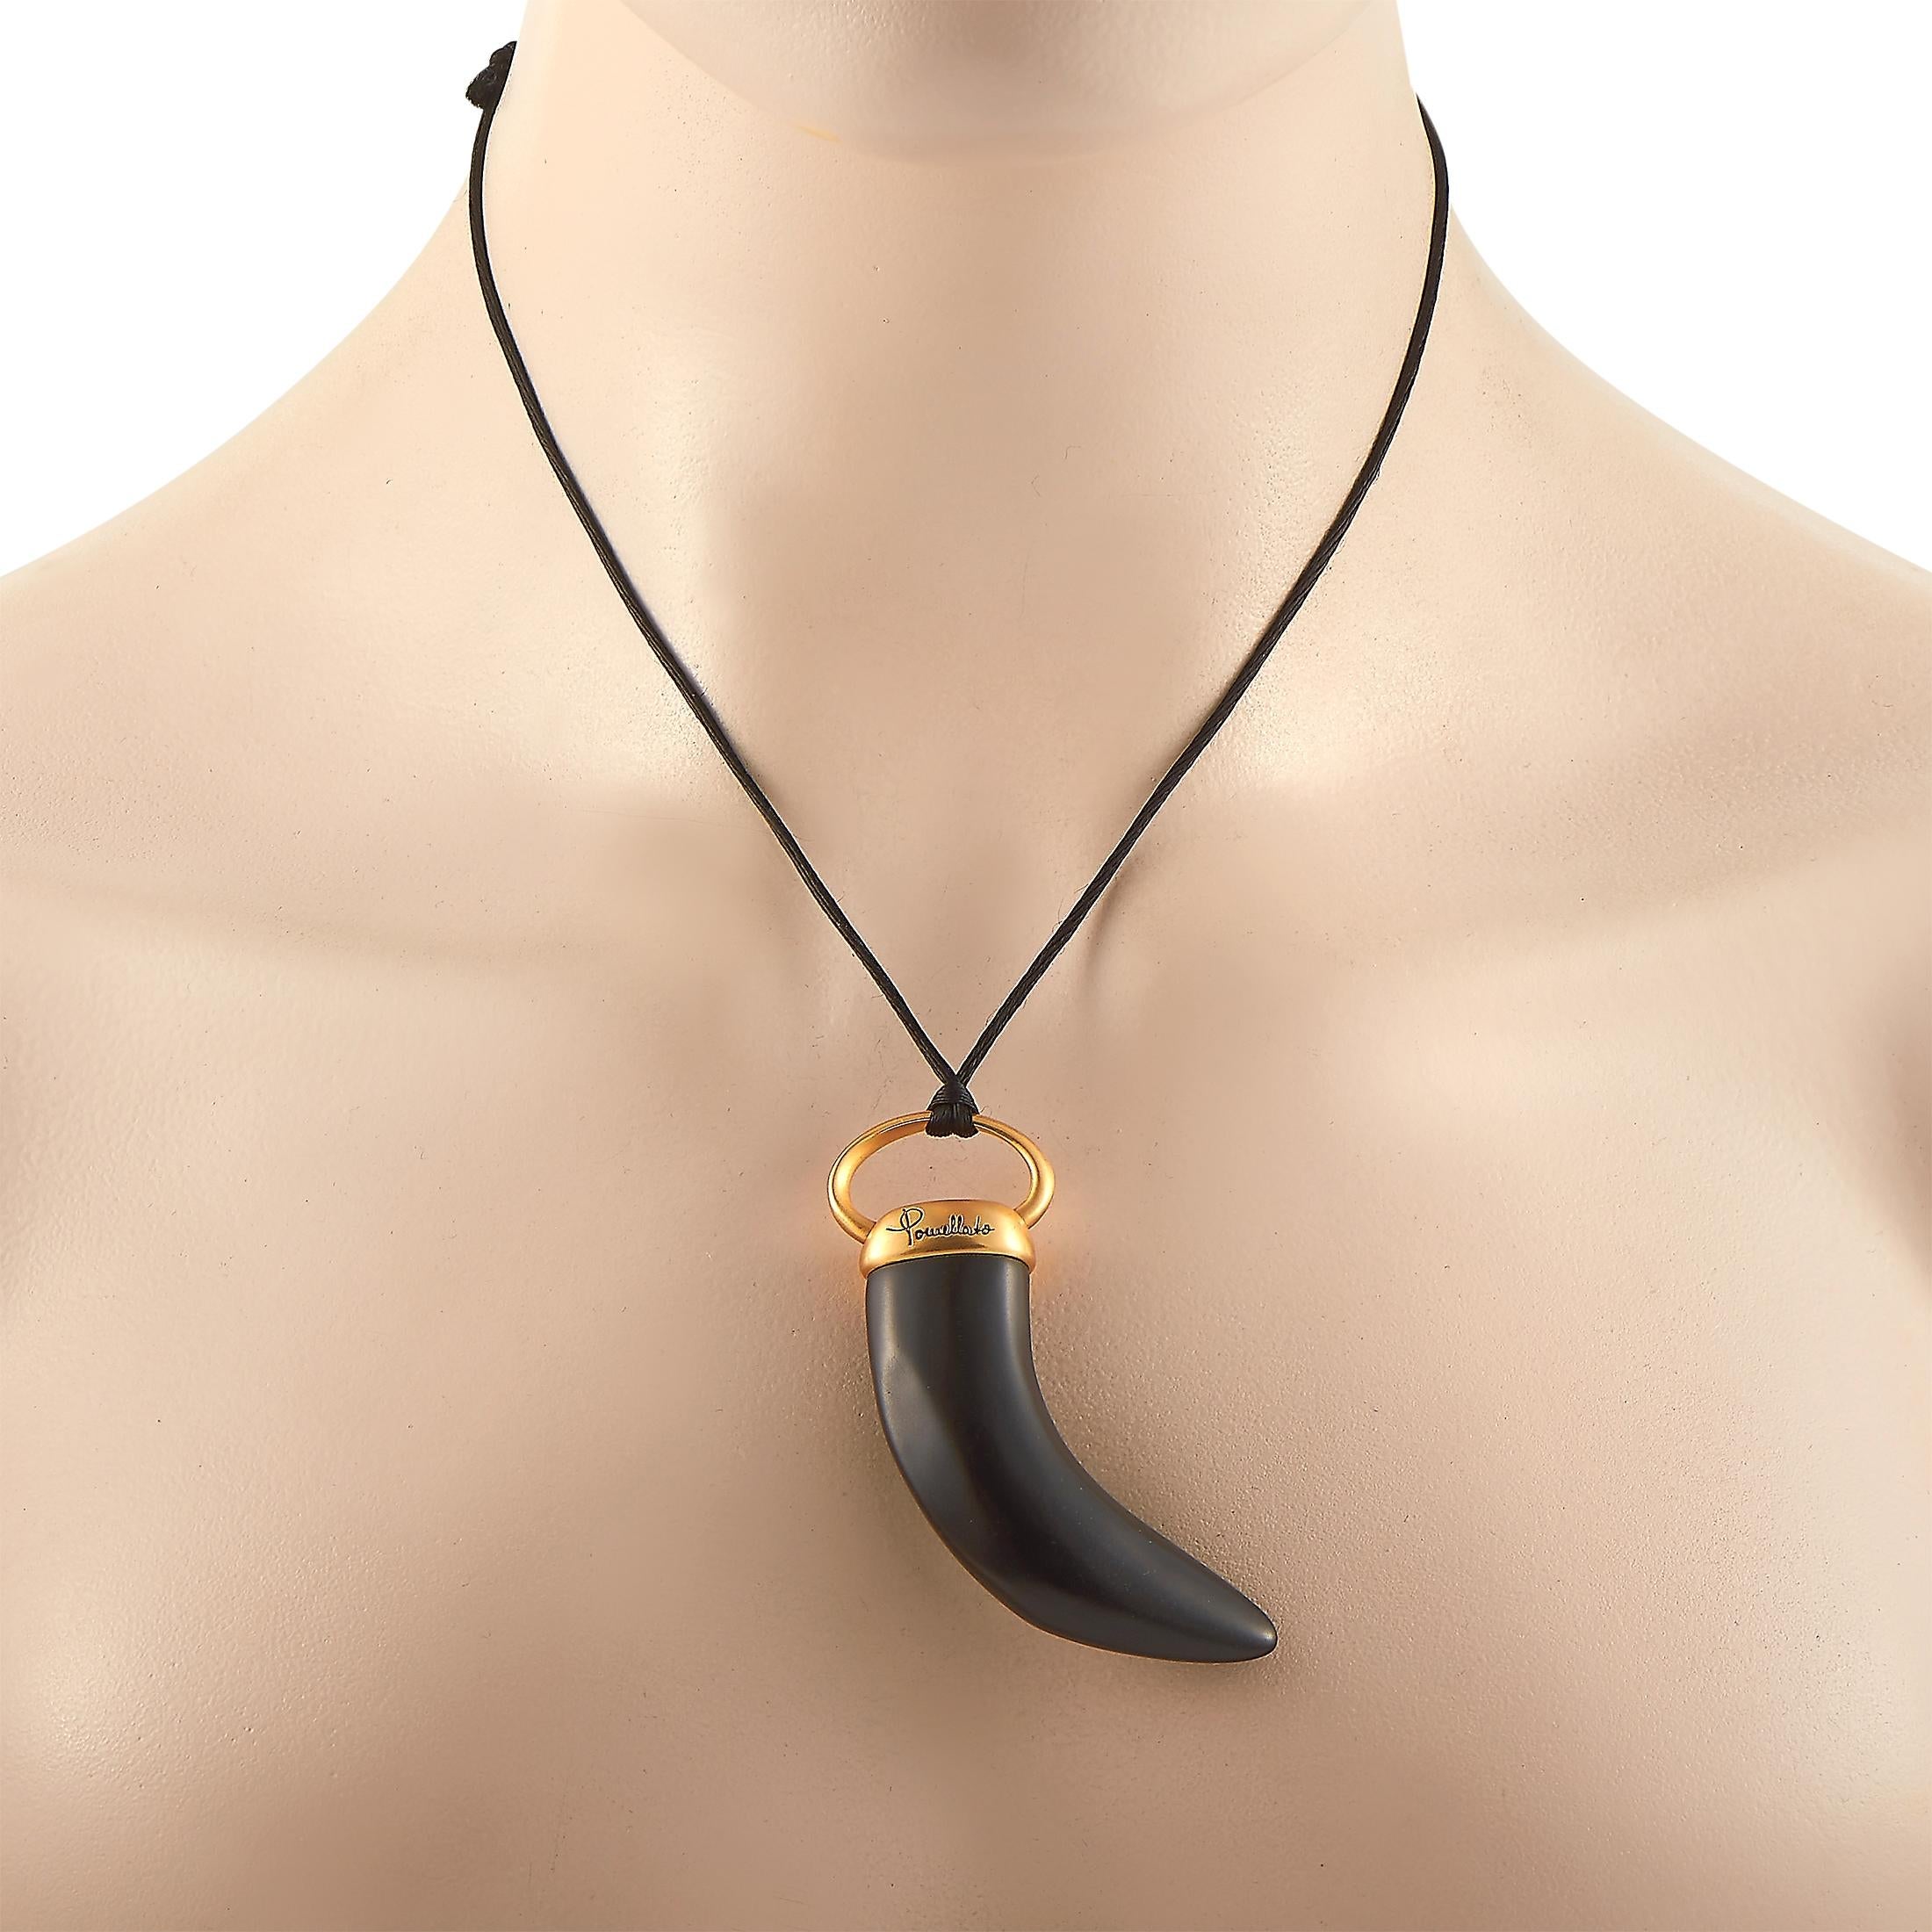 The Pomellato “Victoria” necklace is presented with a black cord onto which a pendant is attached, made out of 18K rose gold and black jet. The cord measures 20” in length and the pendant measures 2.75” by 1.50”. The necklace weighs 21.7 grams.
 
